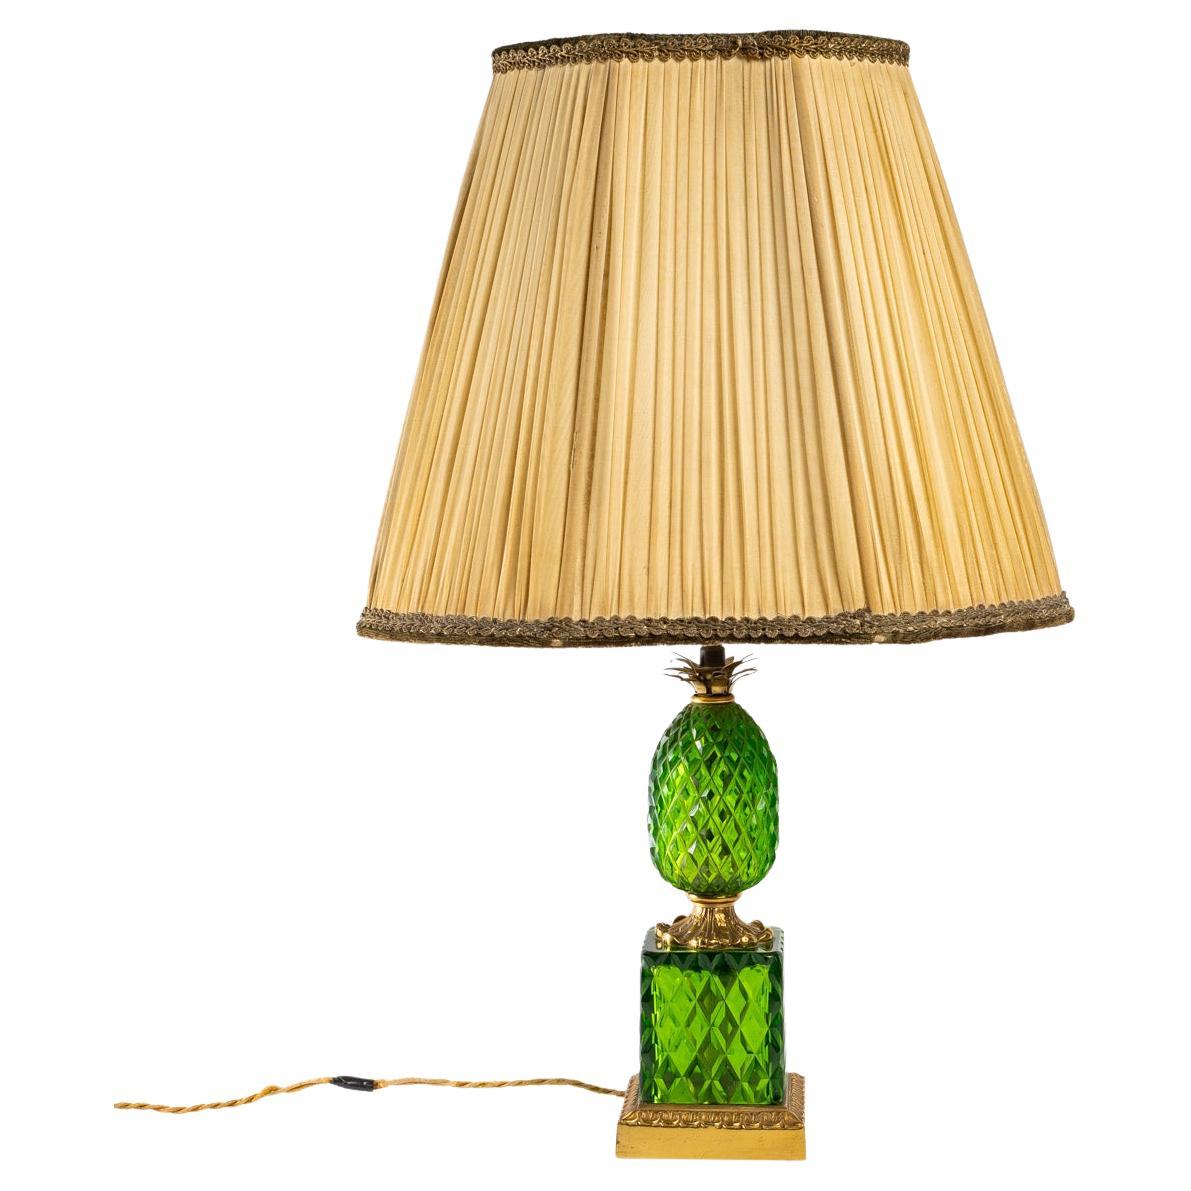 Green crystal and bronze "Pineapple" lamp. For Sale at 1stDibs